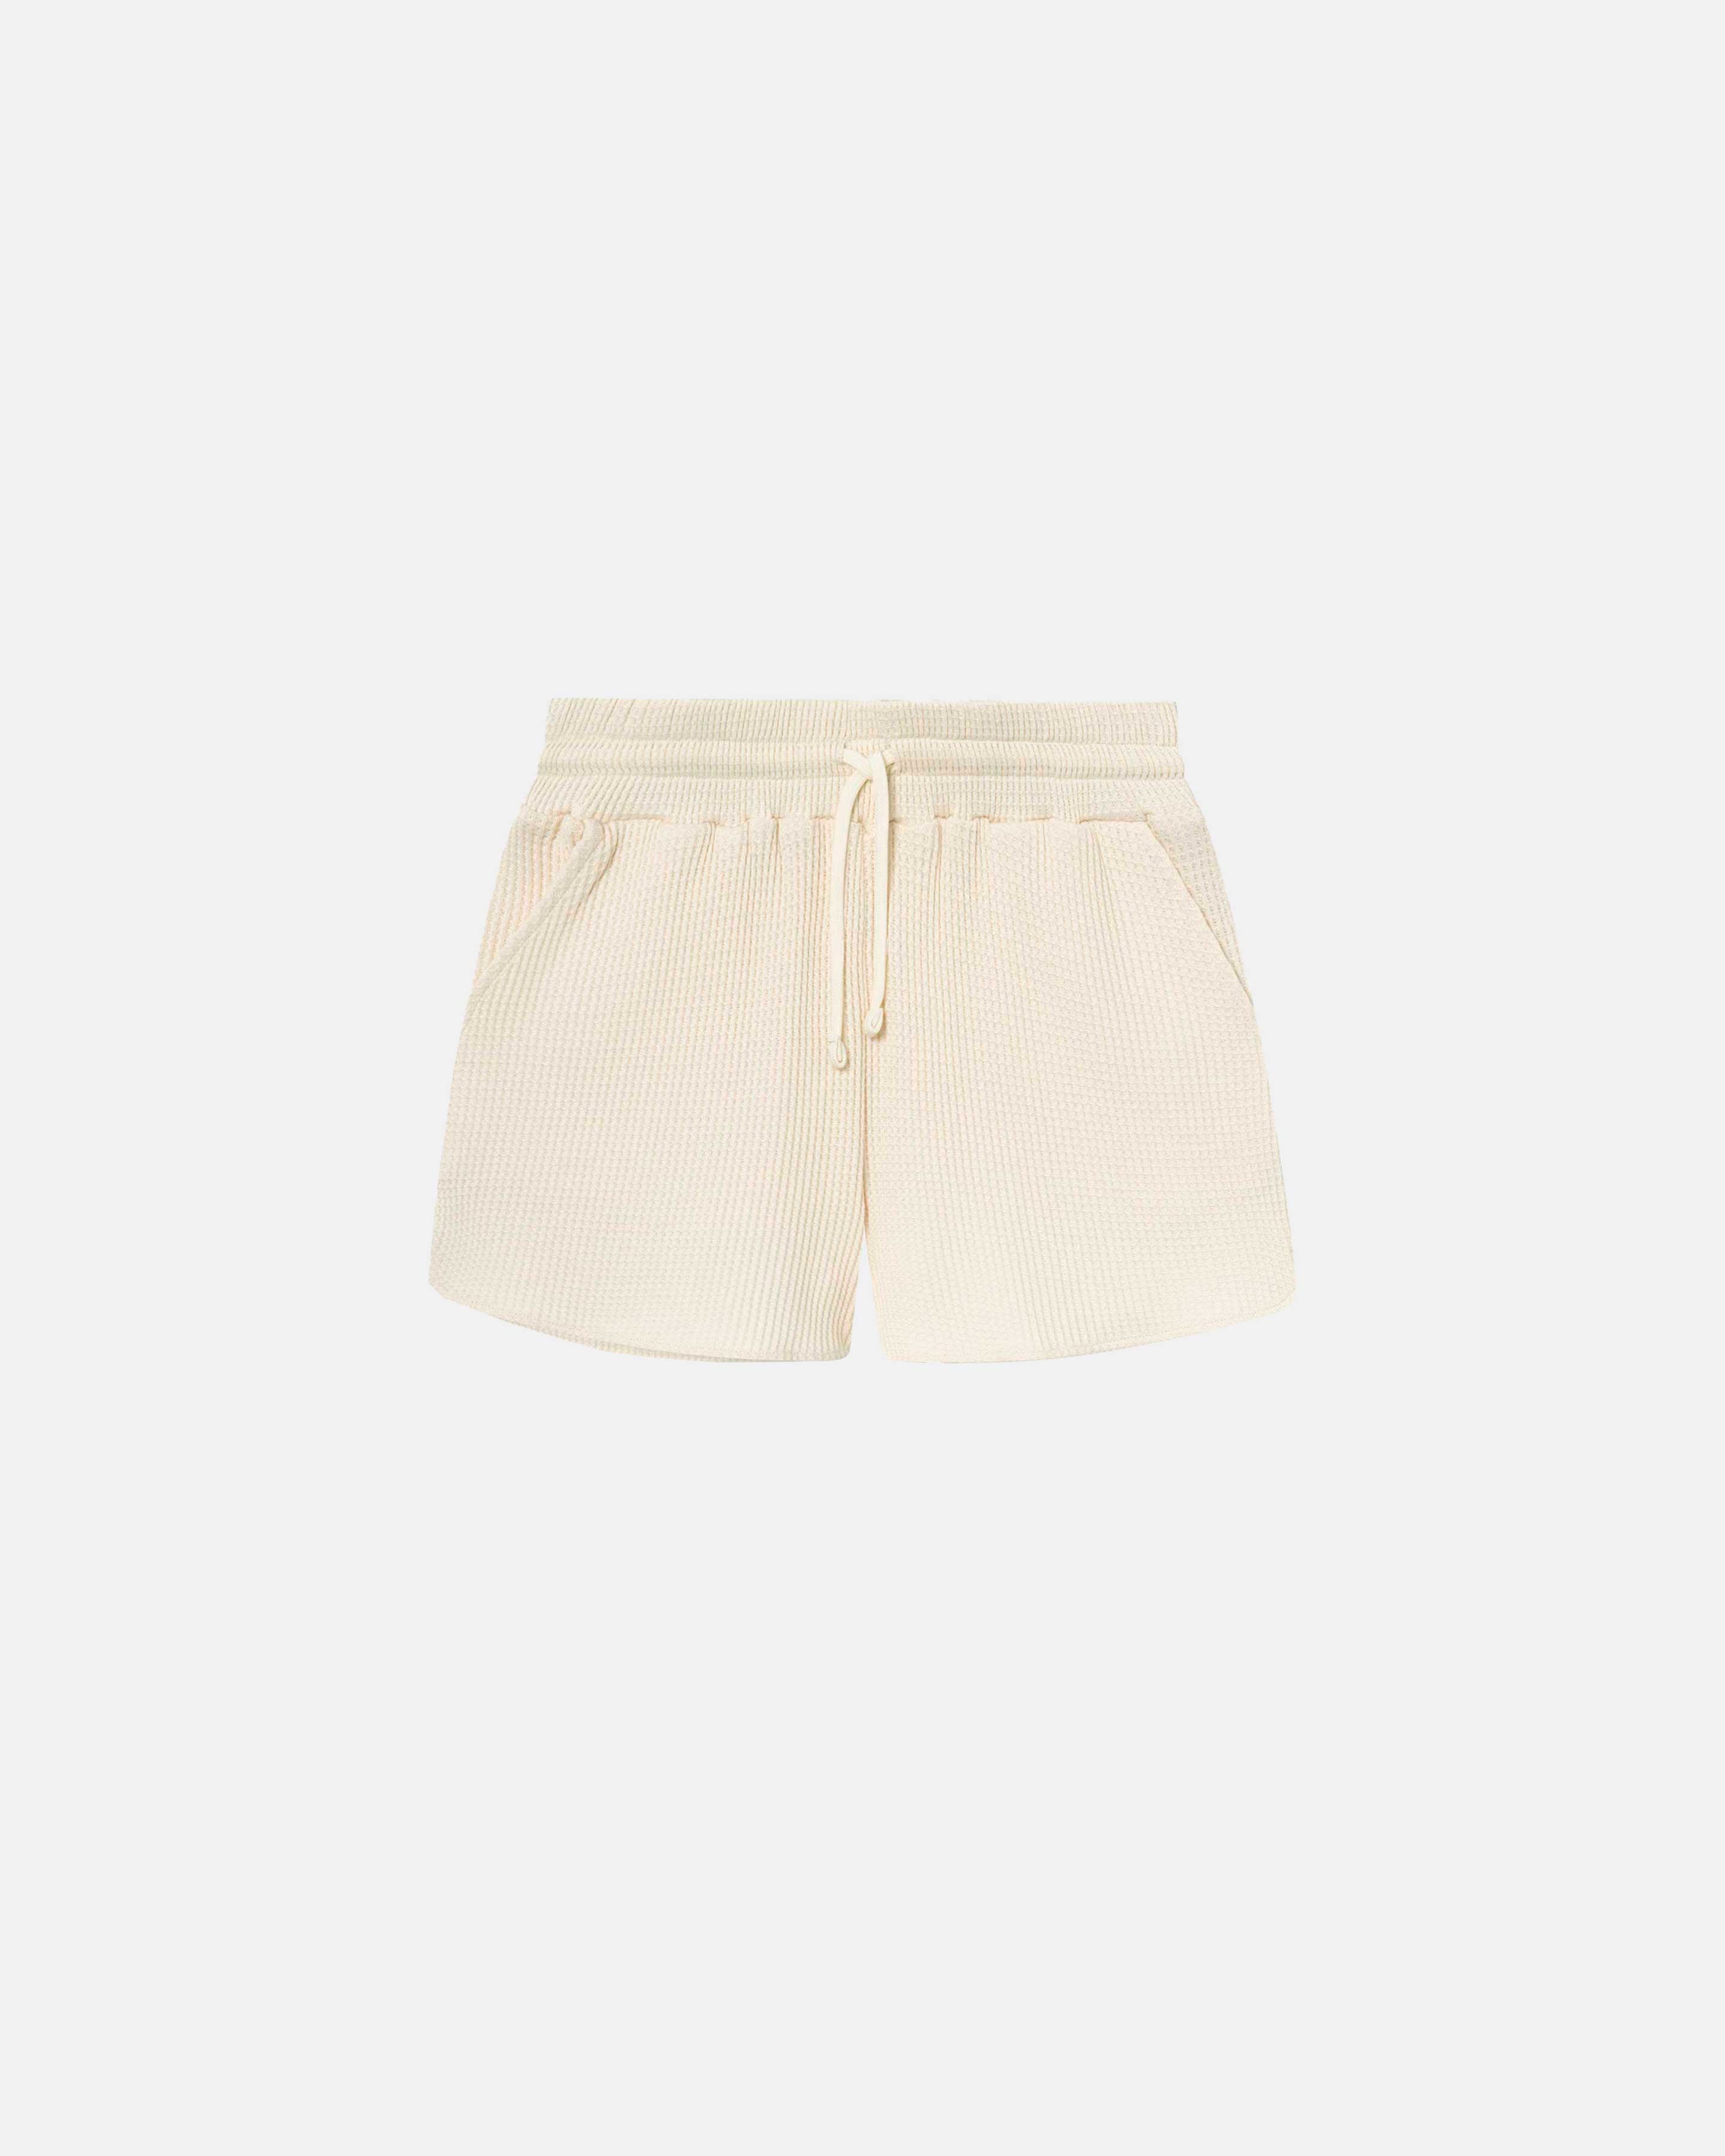 Off white waffle-patterned short-length shorts with two front pockets and a drawstring.